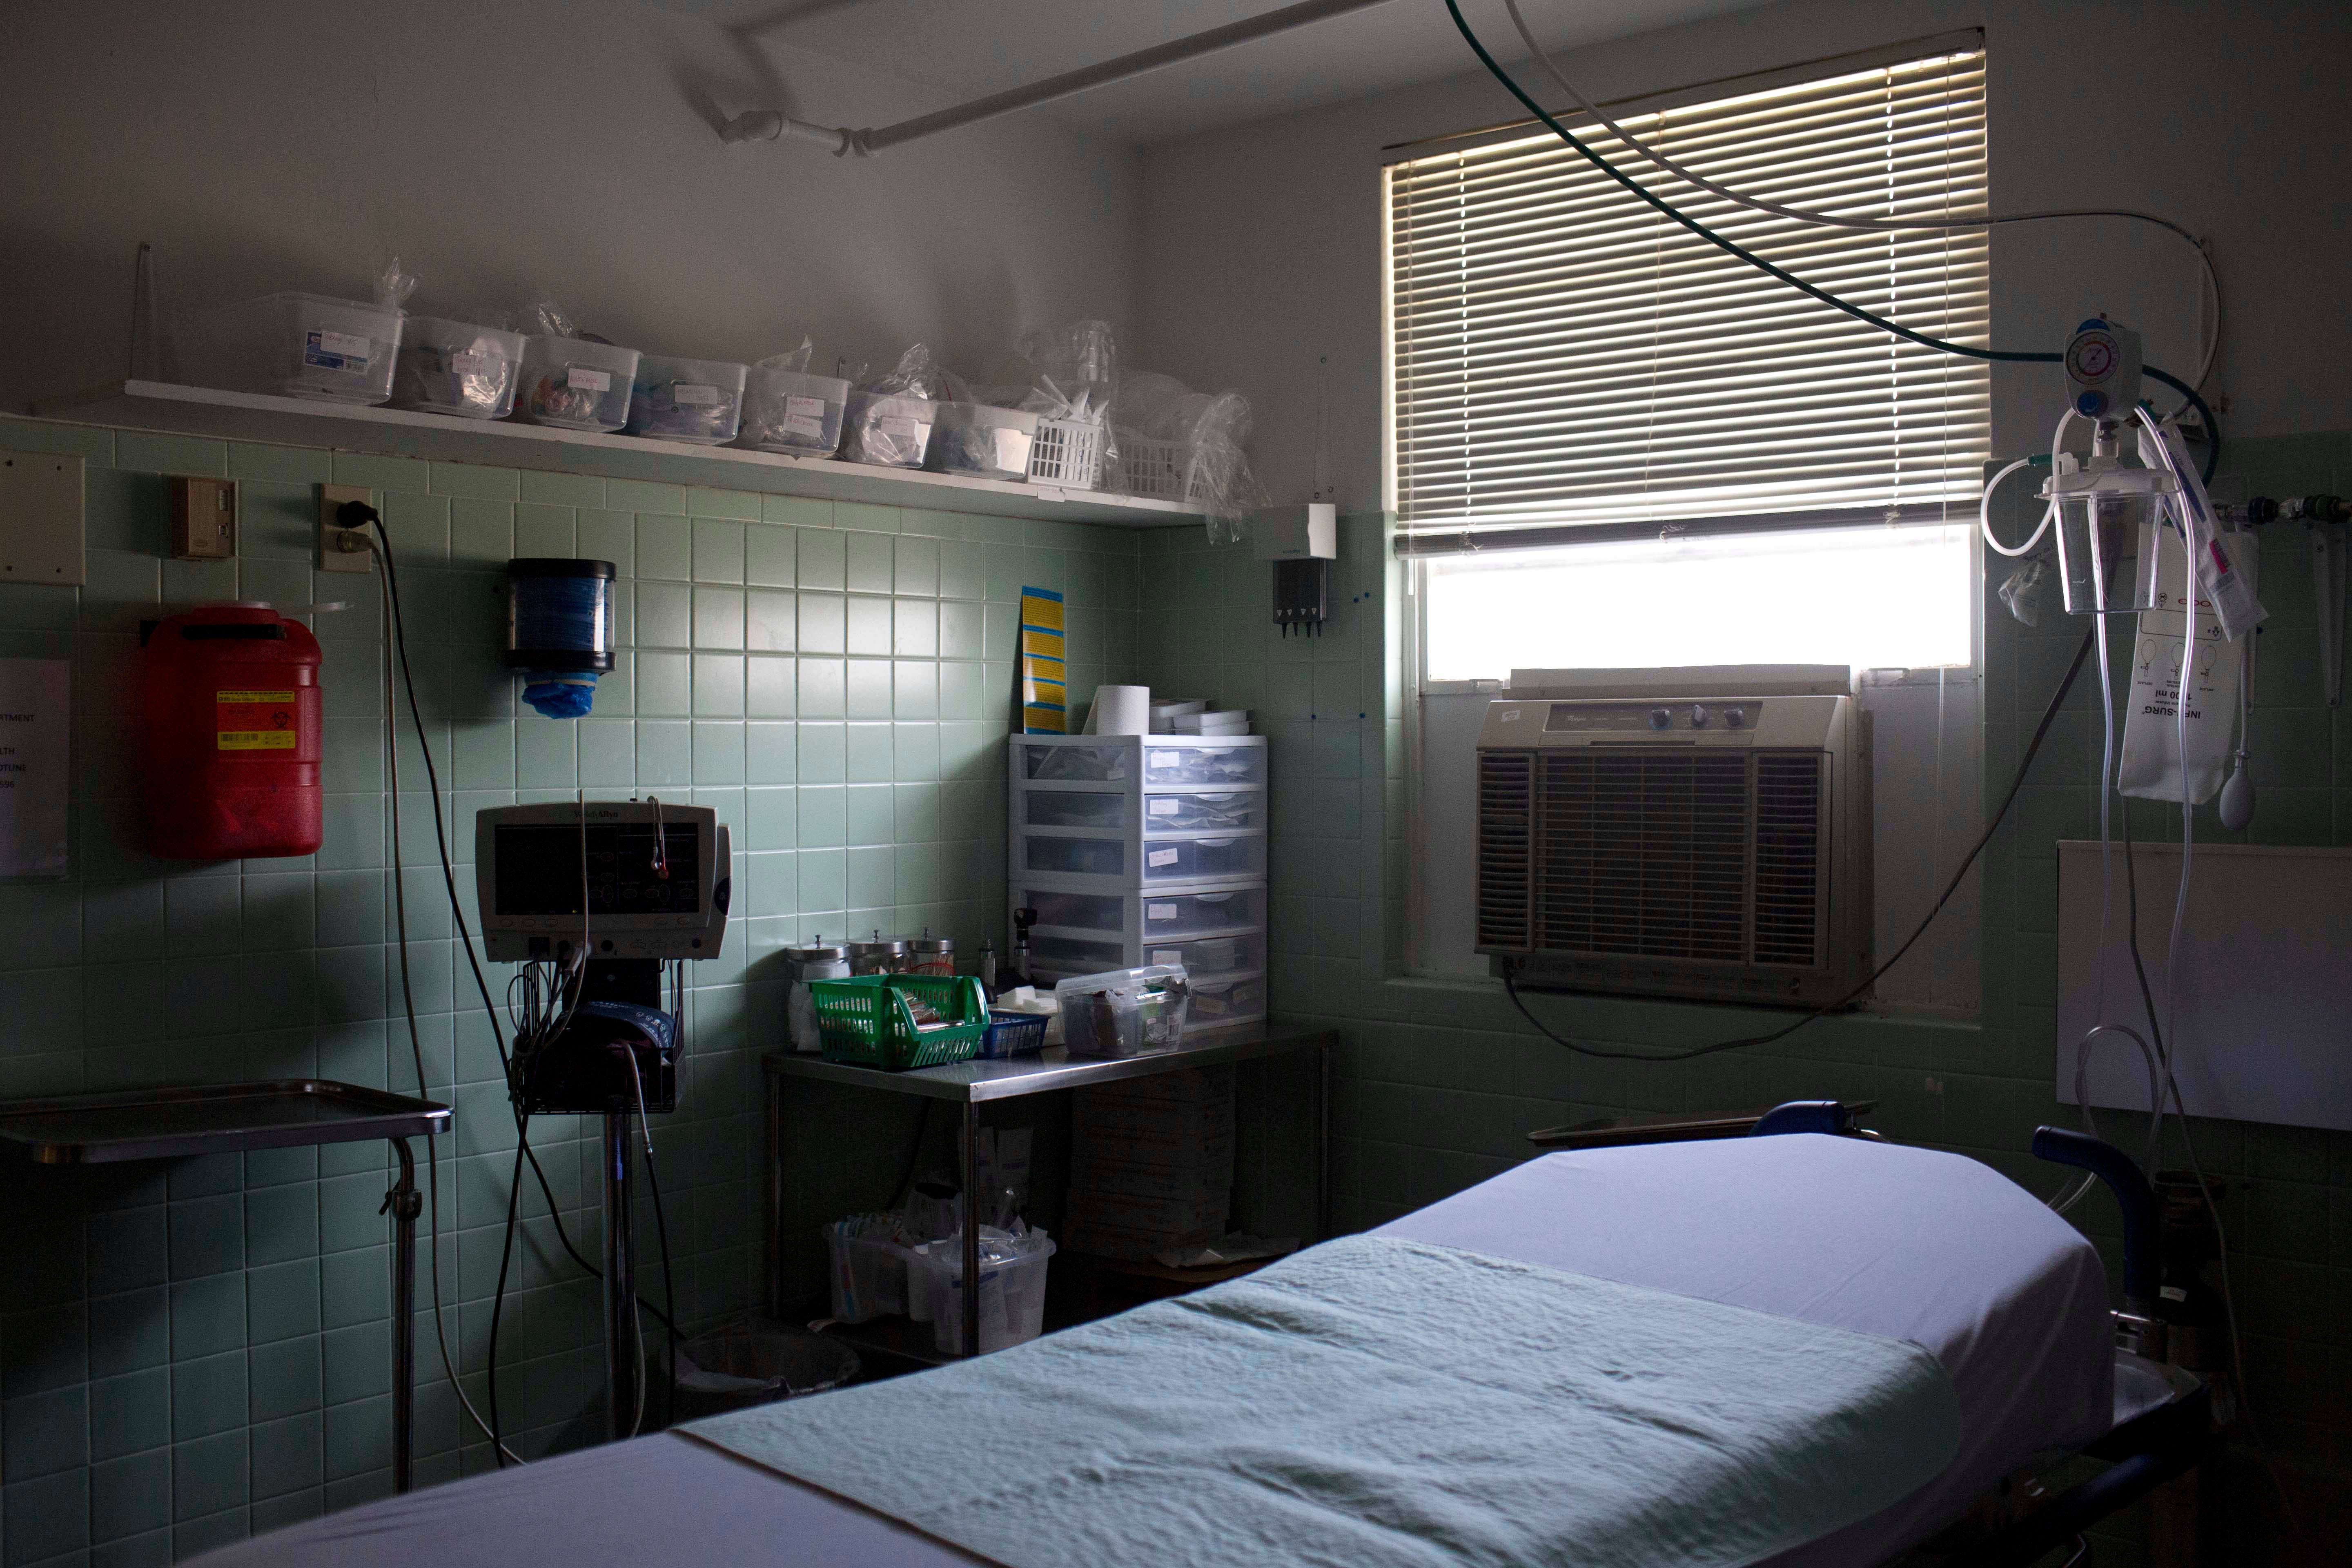 In this Thursday, July 30, 2015, photo, an exam room with a window air conditioning unit is shown at Wedowee Hospital, in Wedowee, Ala.